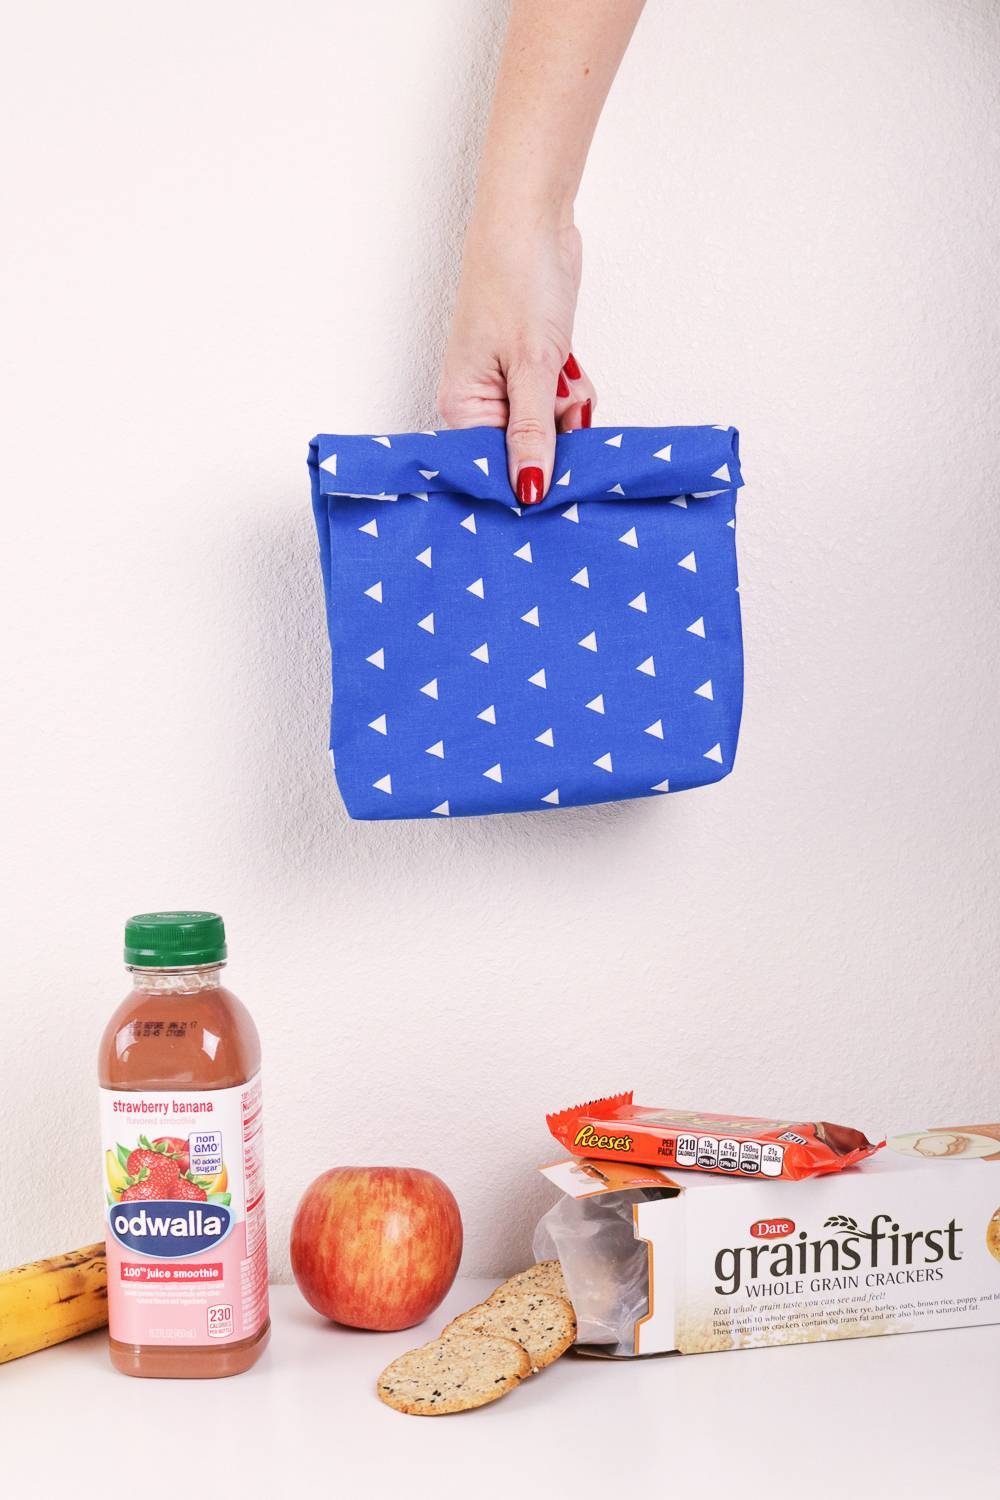 A person holding a blue polka dotted item above groceries.